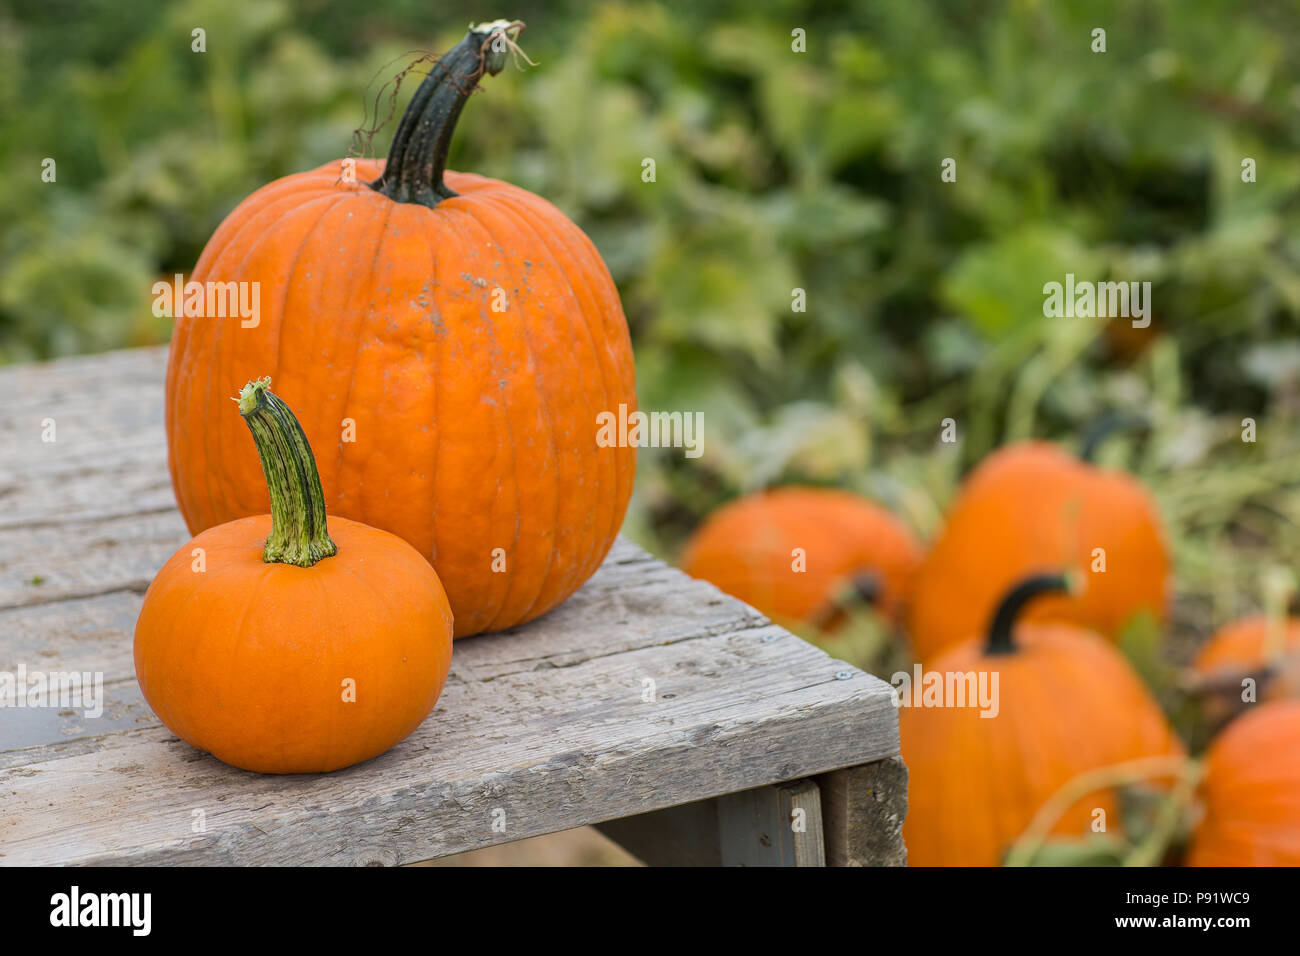 Halloween time when you get to find your own pumpkins Stock Photo